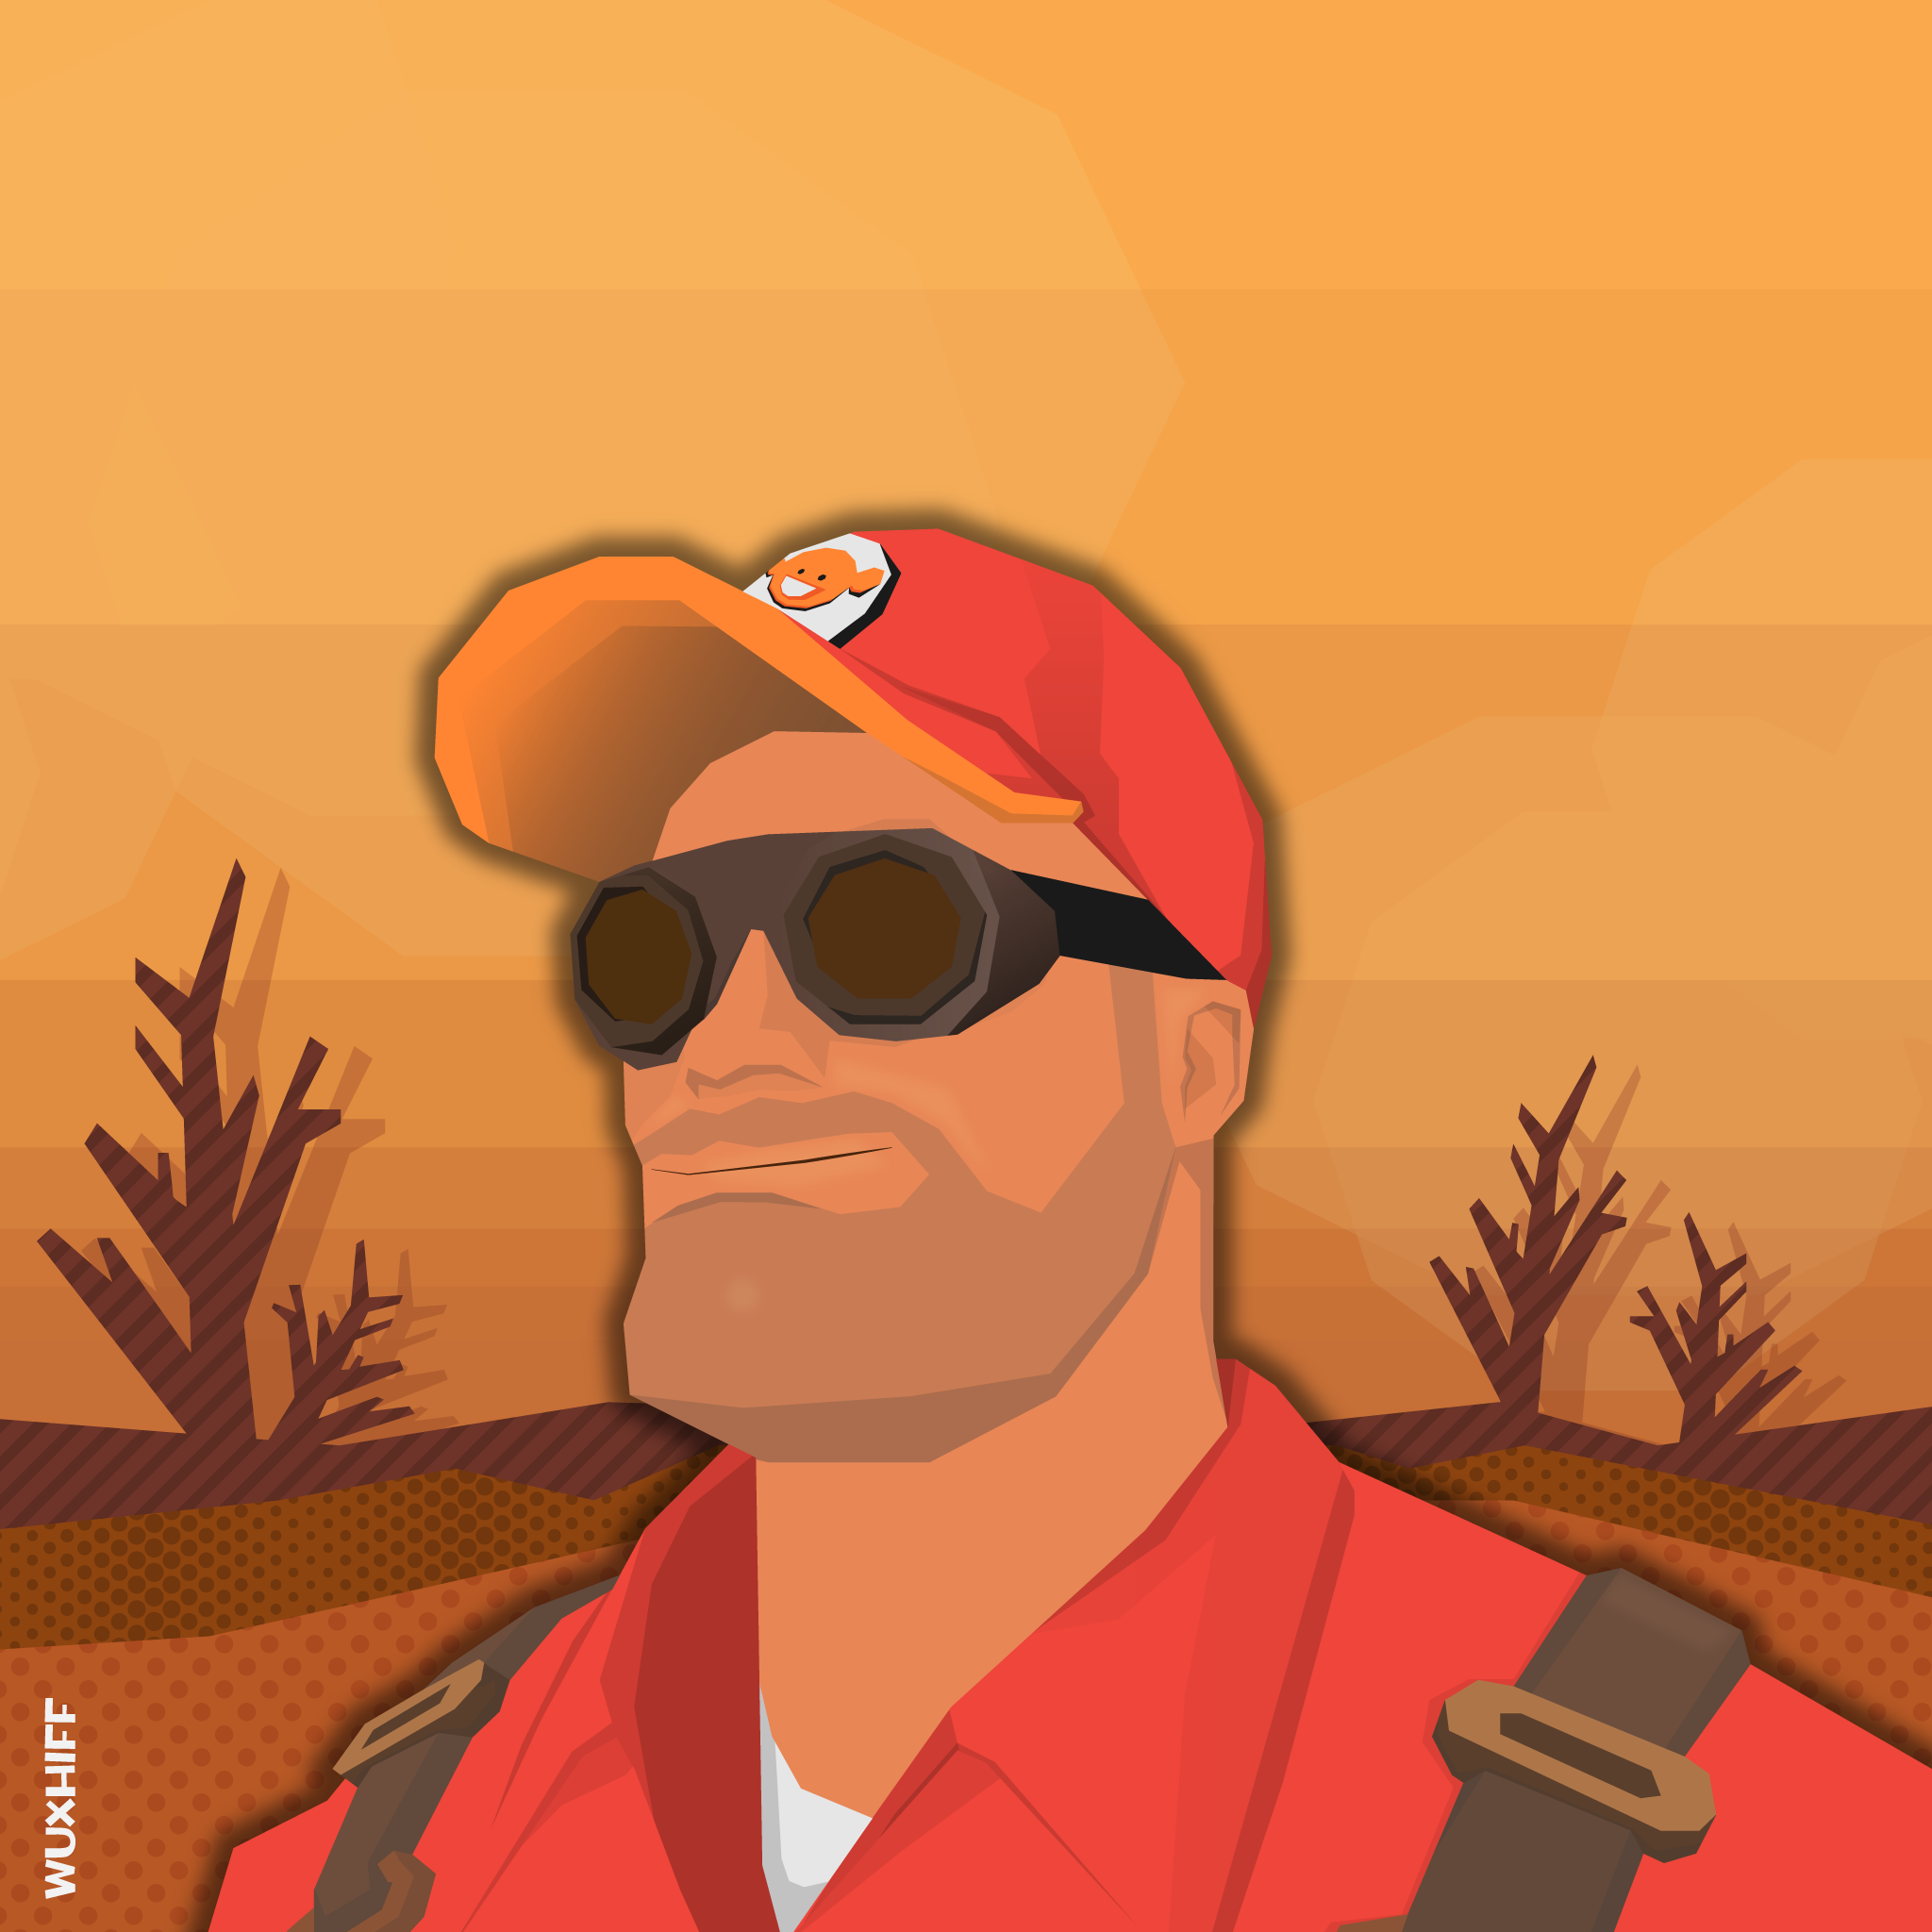 engi_autumn_72hr_without_text.png